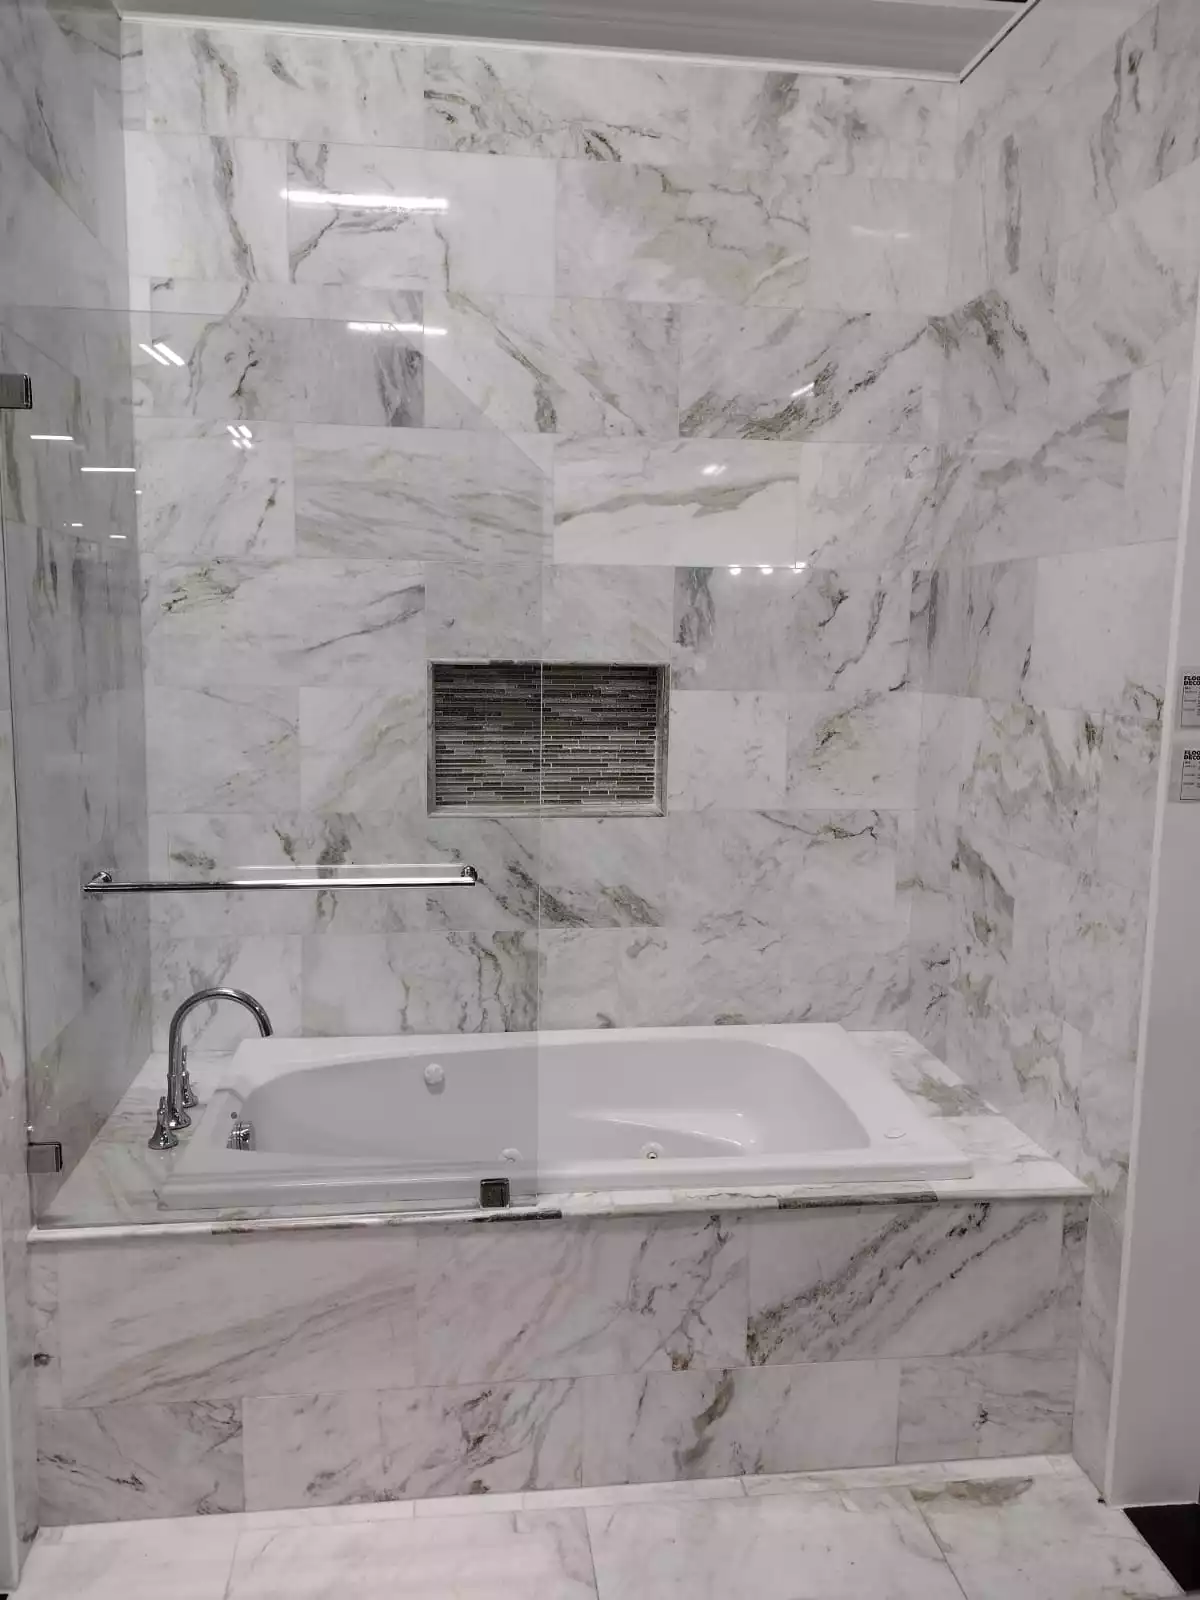 Bathroom renovation with glass door for shower and bath tub